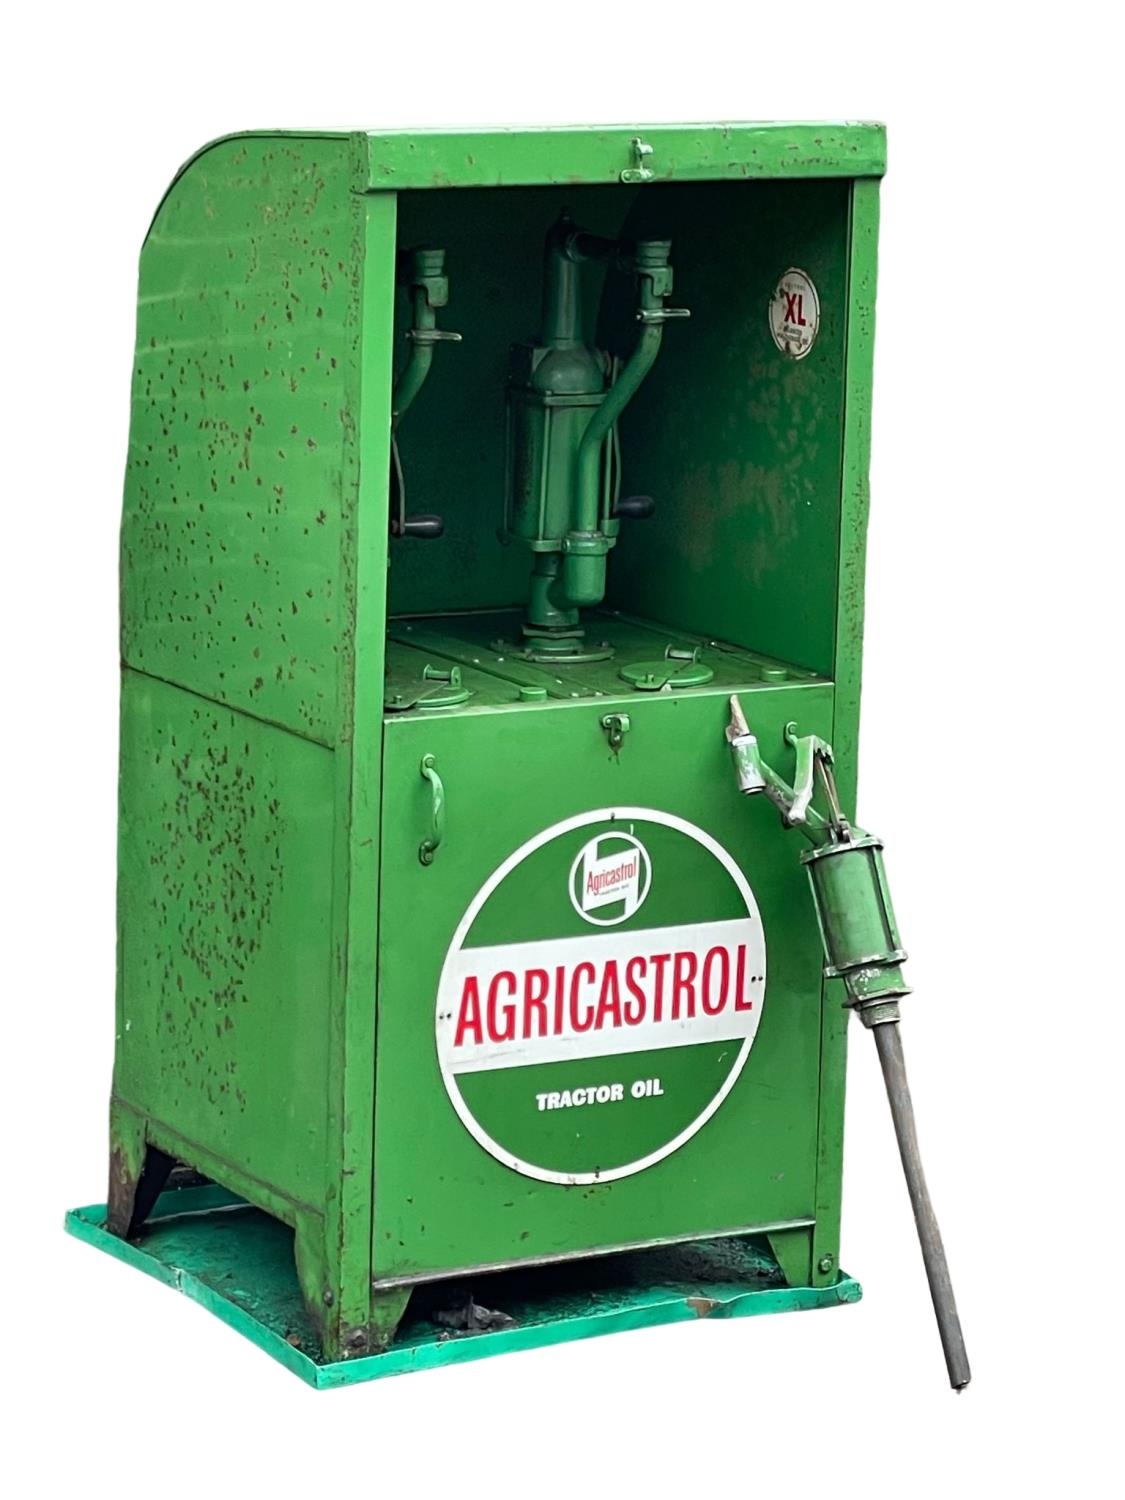 A large Agricastrol Tractor Oil dispenser 69x63x141cm. - Image 2 of 7